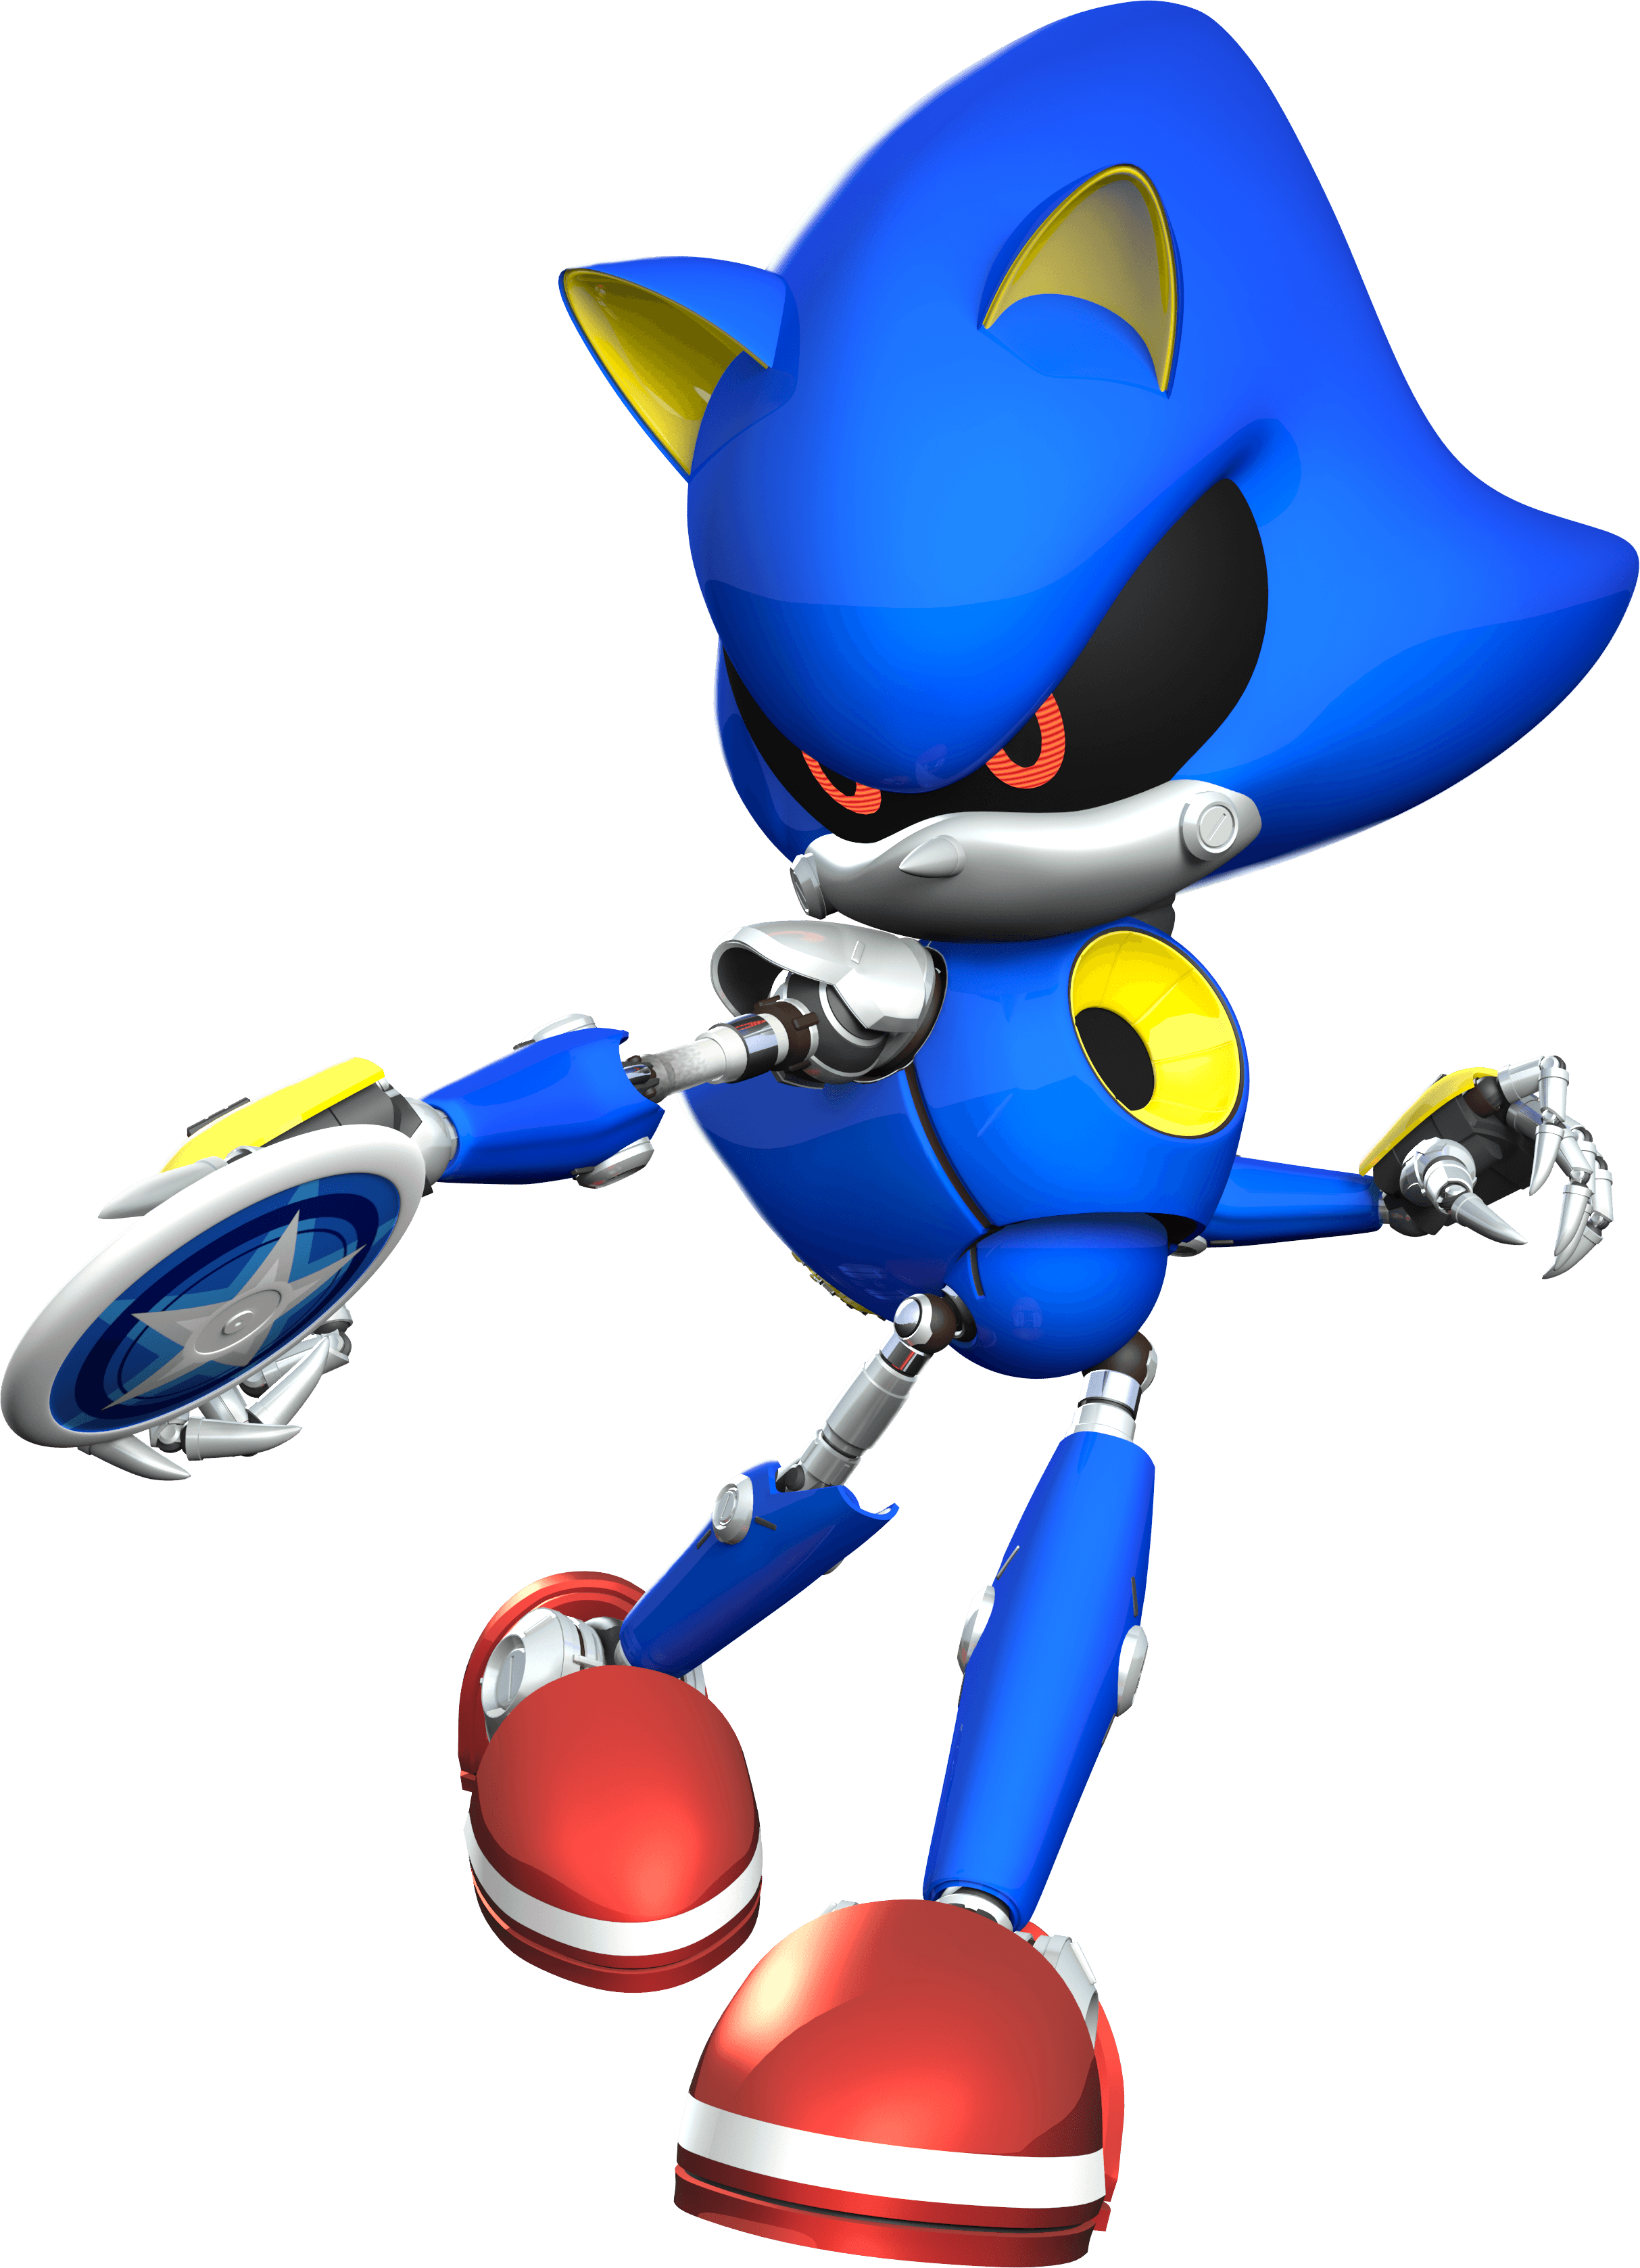 Metal Sonic Throwing Discus - Mario & Sonic At The Olympic Winter Games Metal (2426x3354)